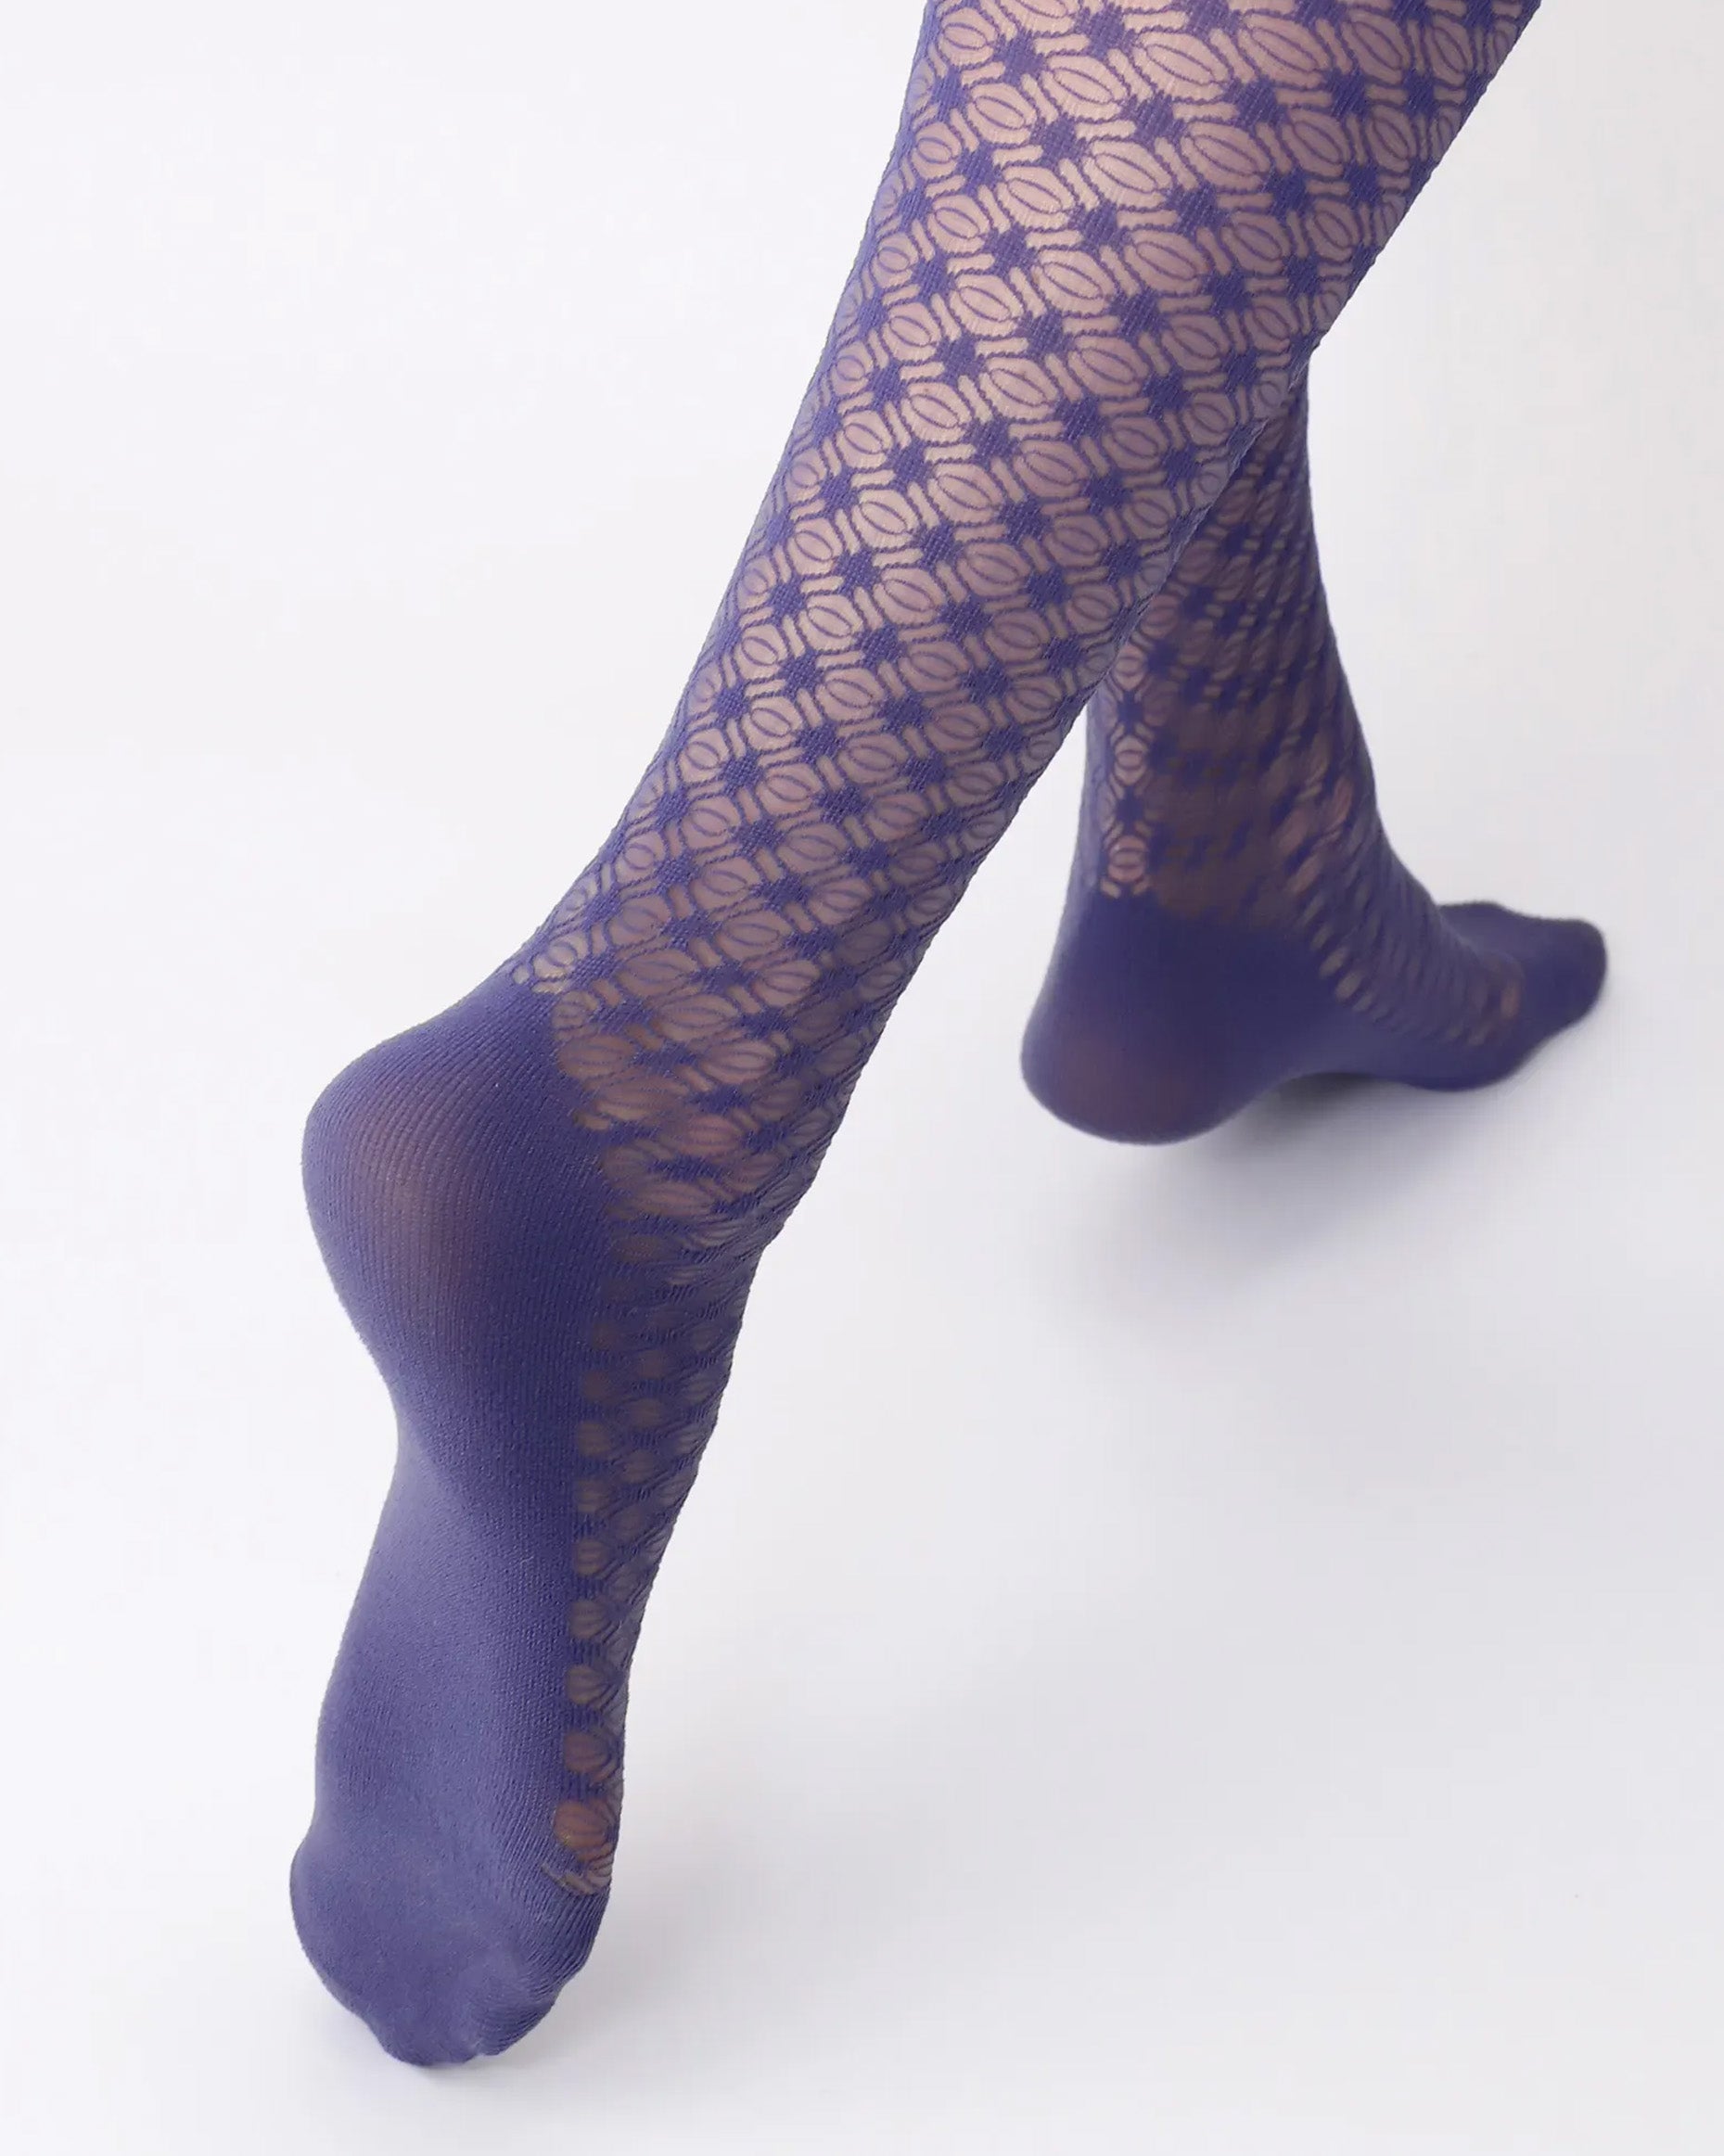 Oroblù Eco Craft Sneaker Tights - Indigo blue semi sheer fashion tights made of eco friendly recycled polyamide with a woven enclosed crochet style diamond net pattern, built in sneaker sock.